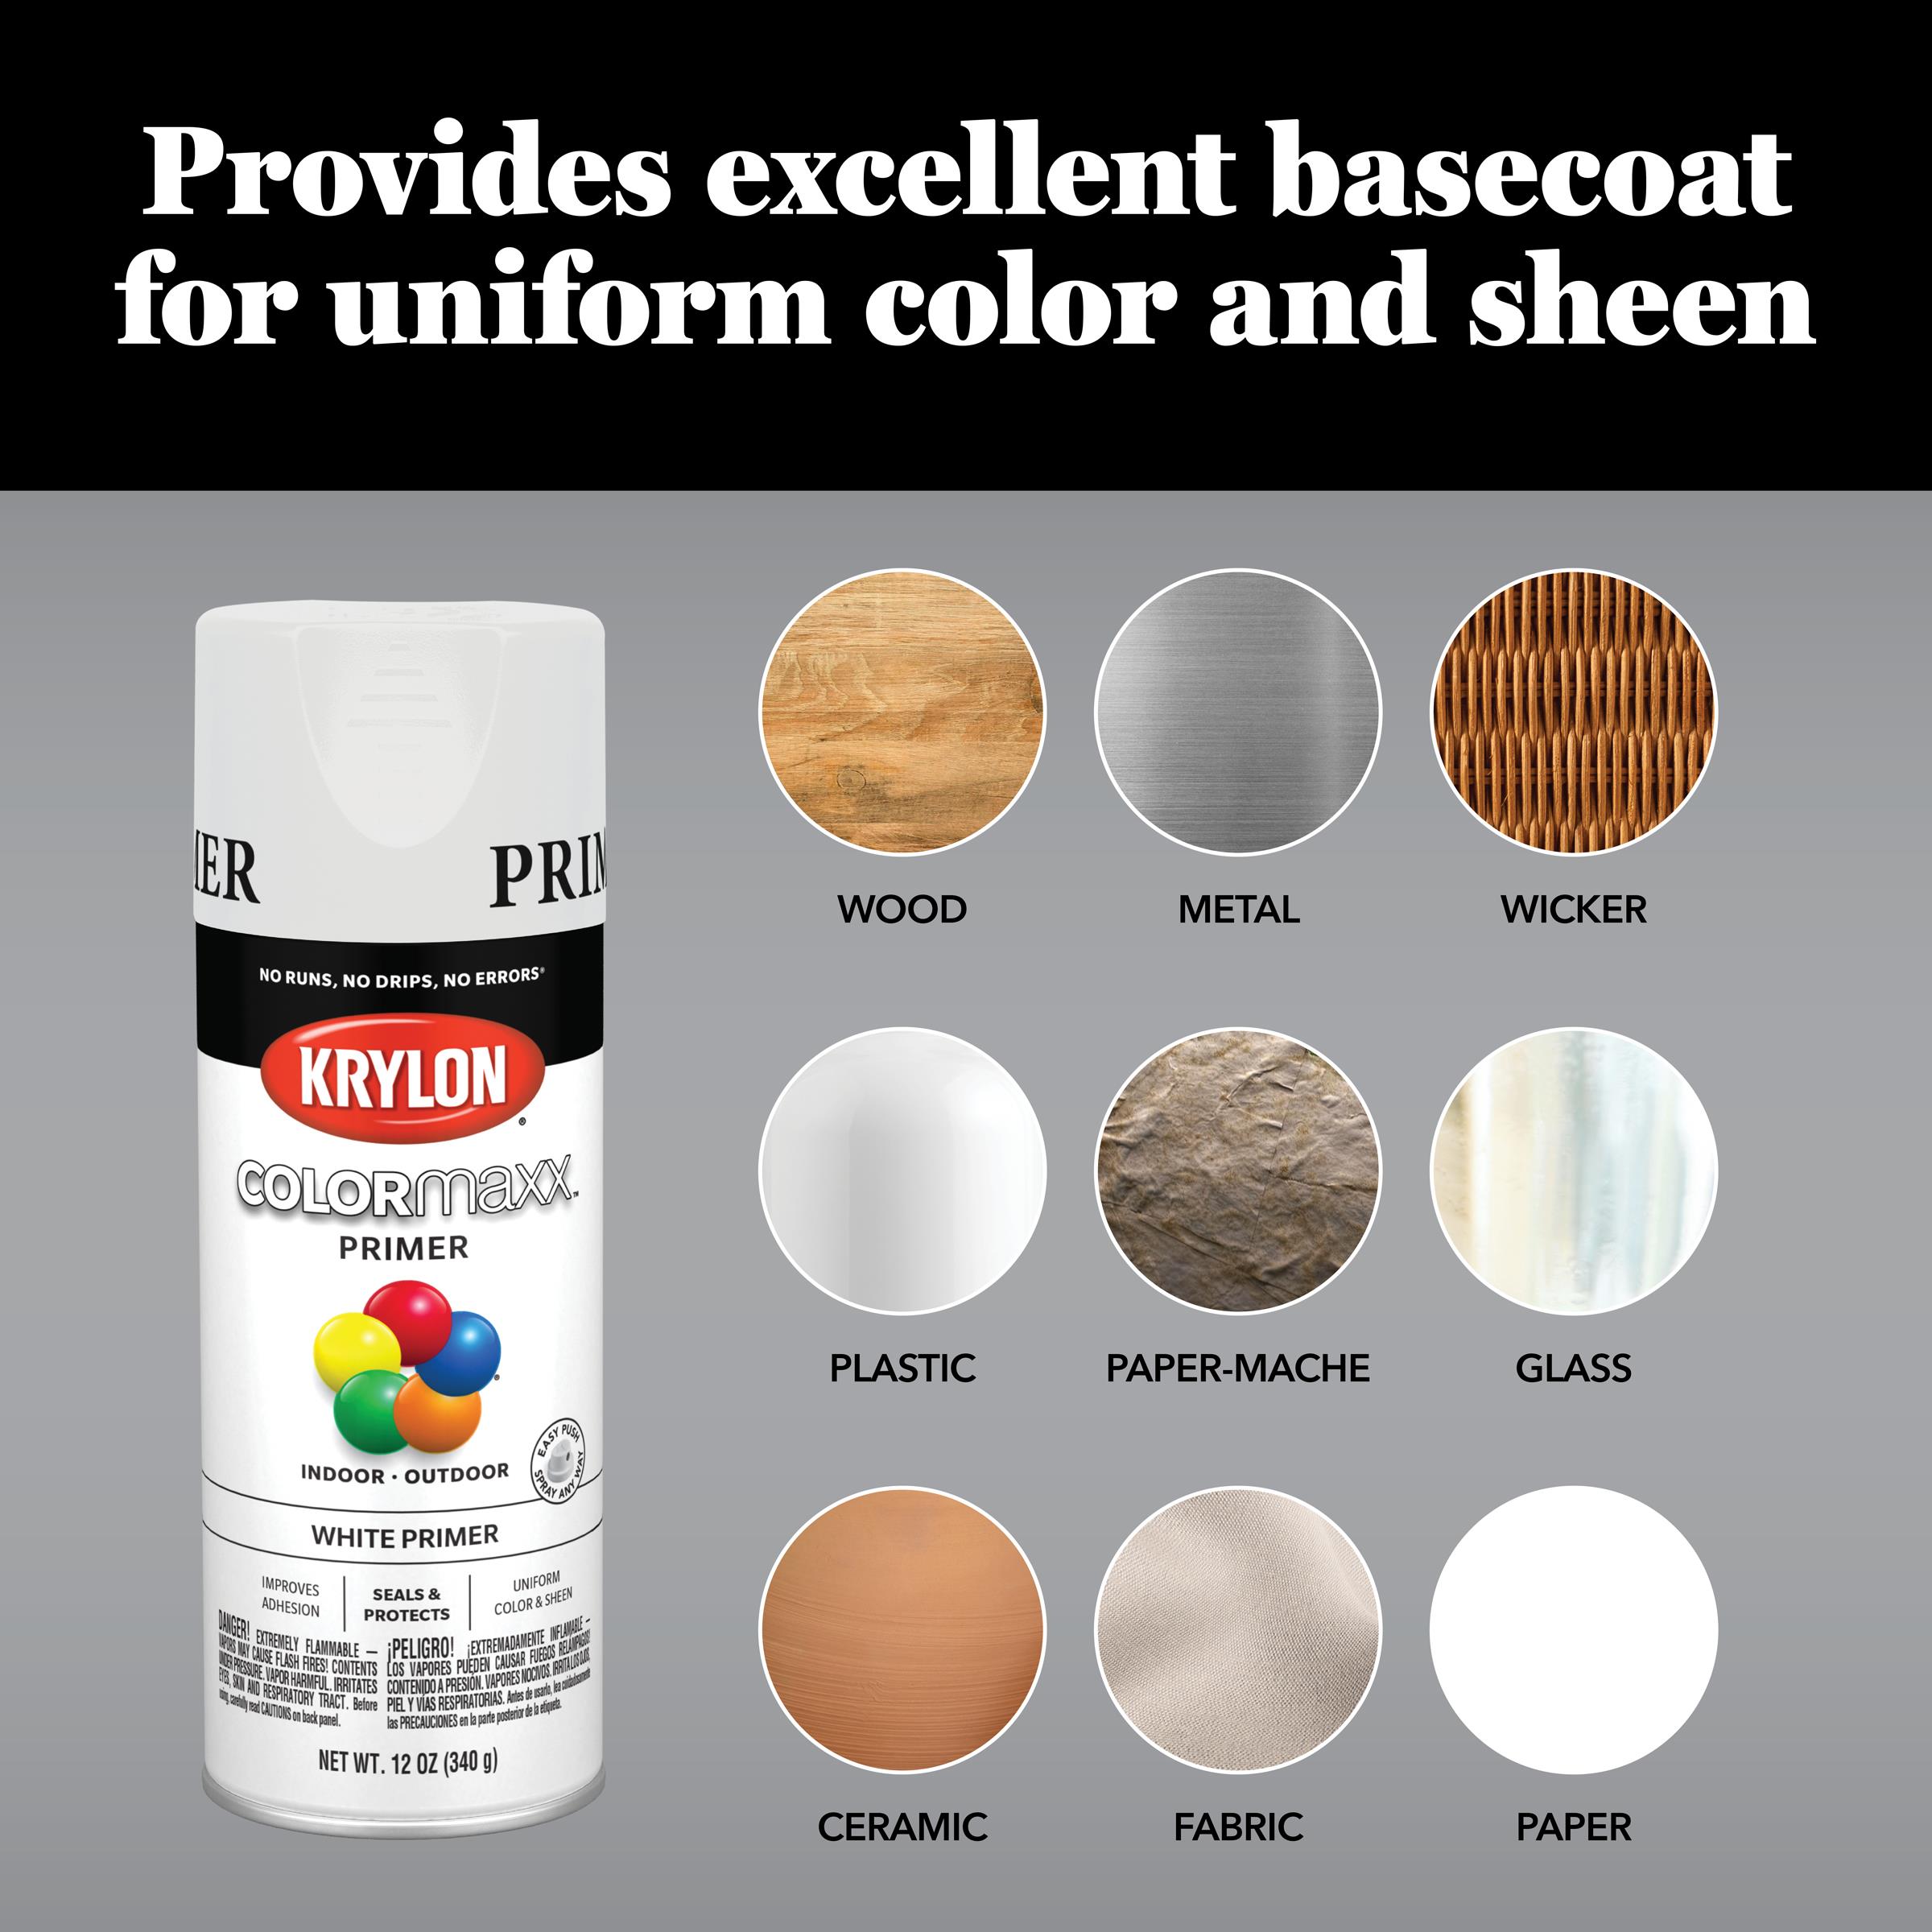 What Krylon paint is a match for stone white?